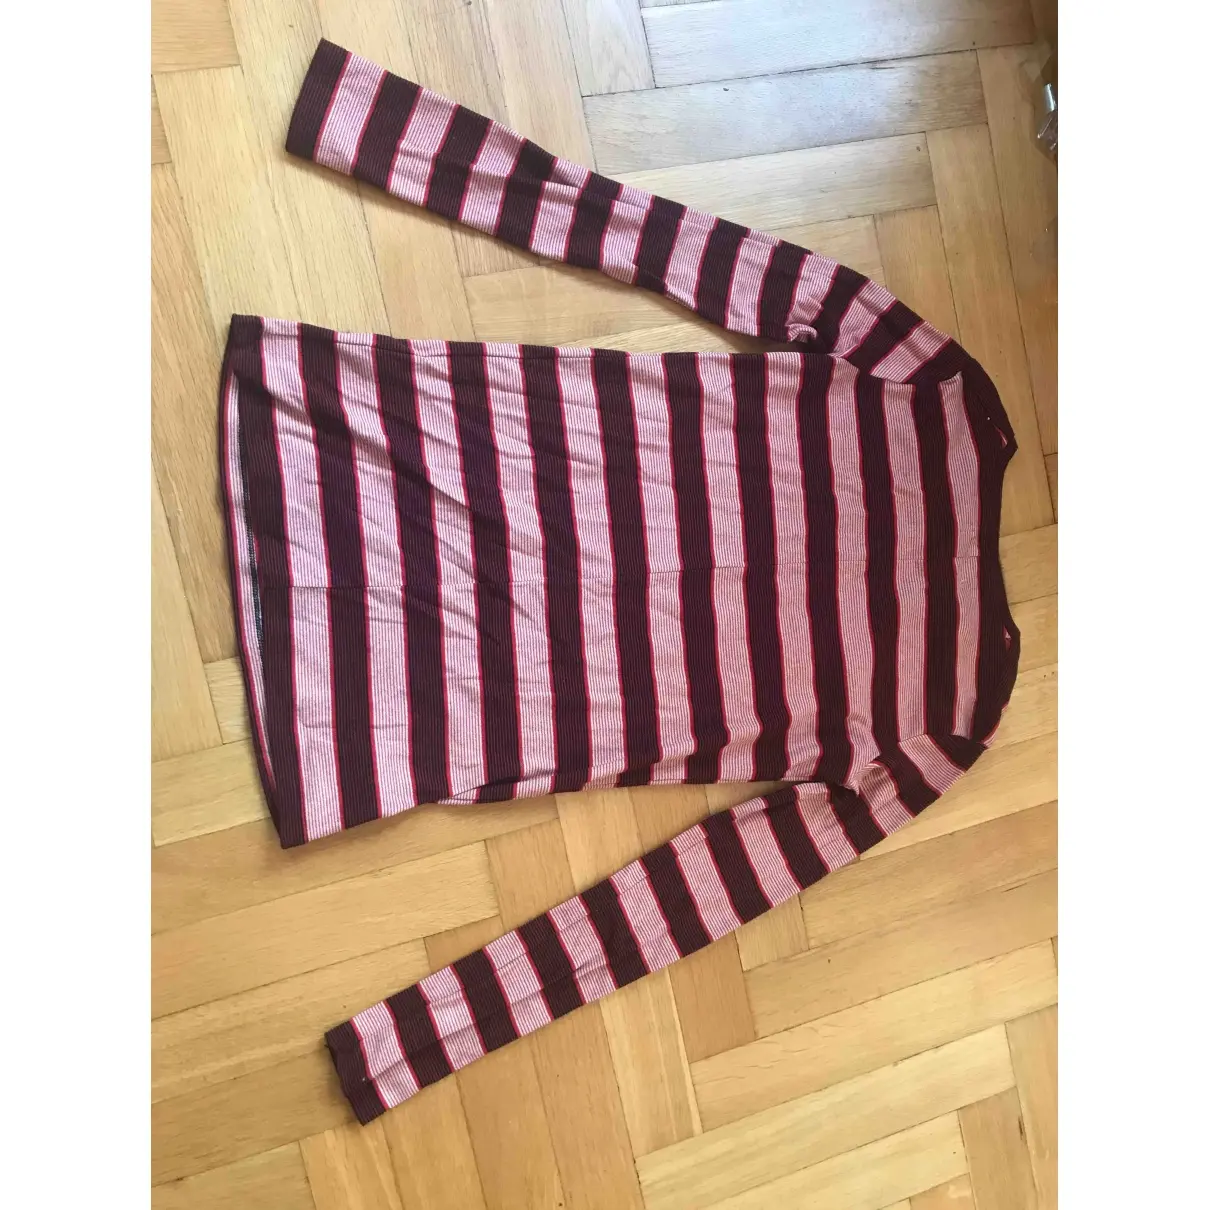 Mih Jeans Burgundy Cotton Top for sale